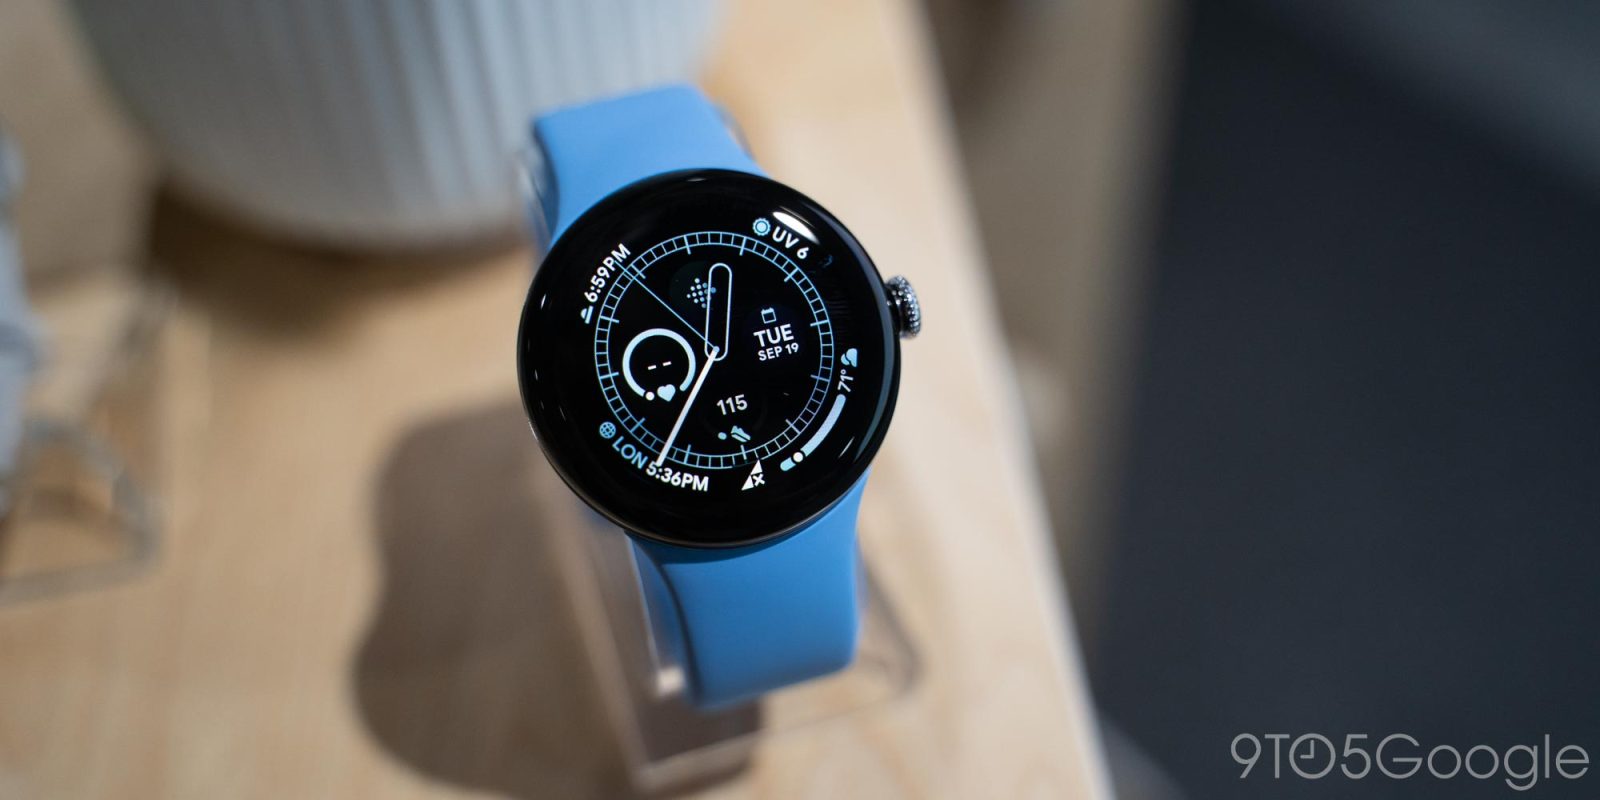 Google's new Pixel Watch faces hurdles with economy, no iPhone support